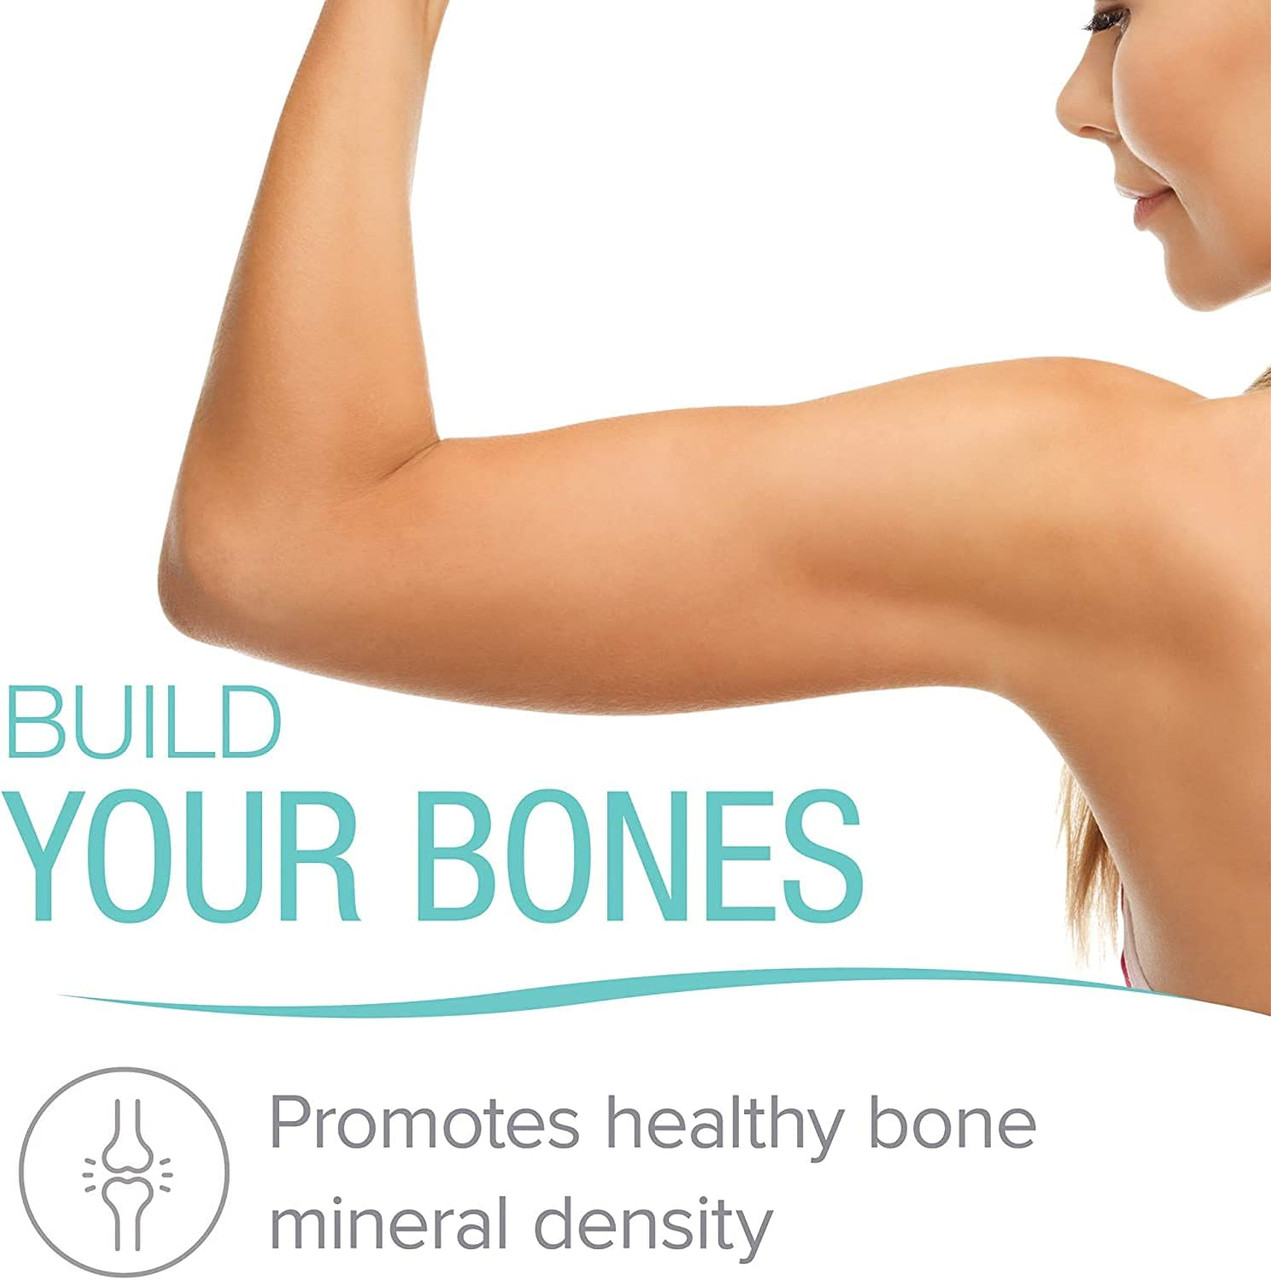 Biosil promotes healthy bones and mineral density